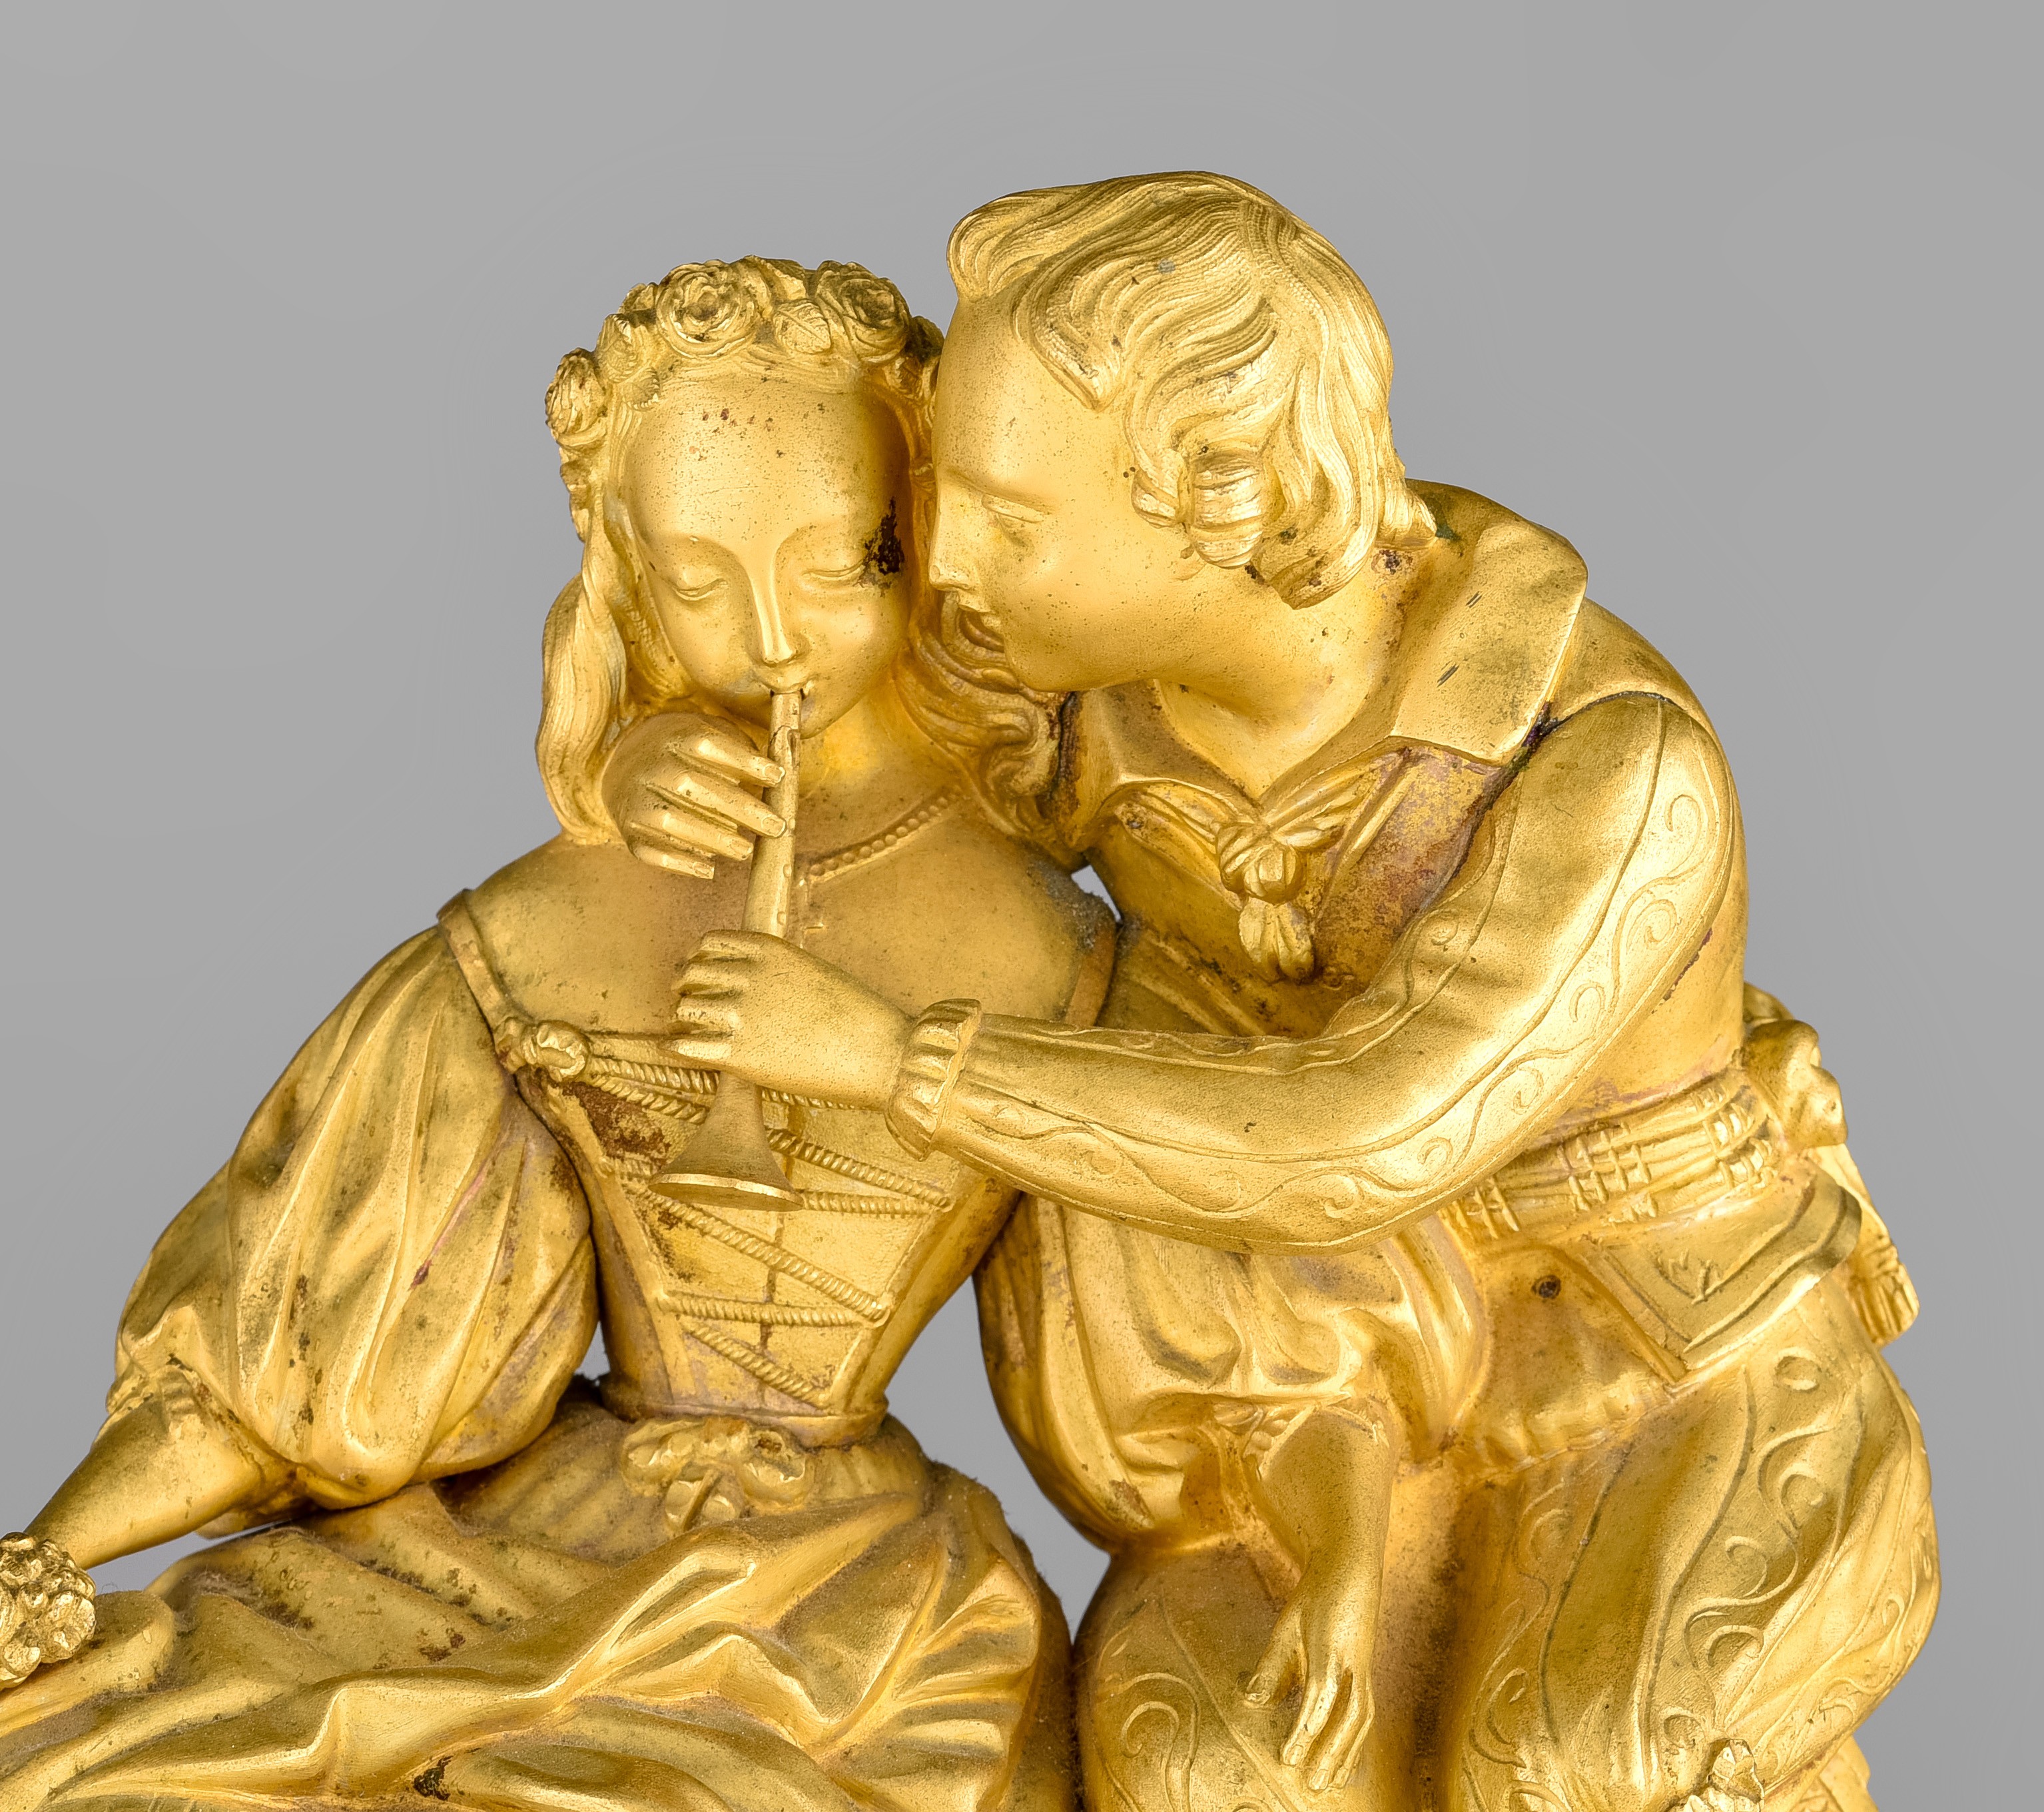 A Charles X gilt bronze mantle clock by Henri Robert, with a gallant scene, mid 19thC, H 38,5 cm - Image 9 of 9